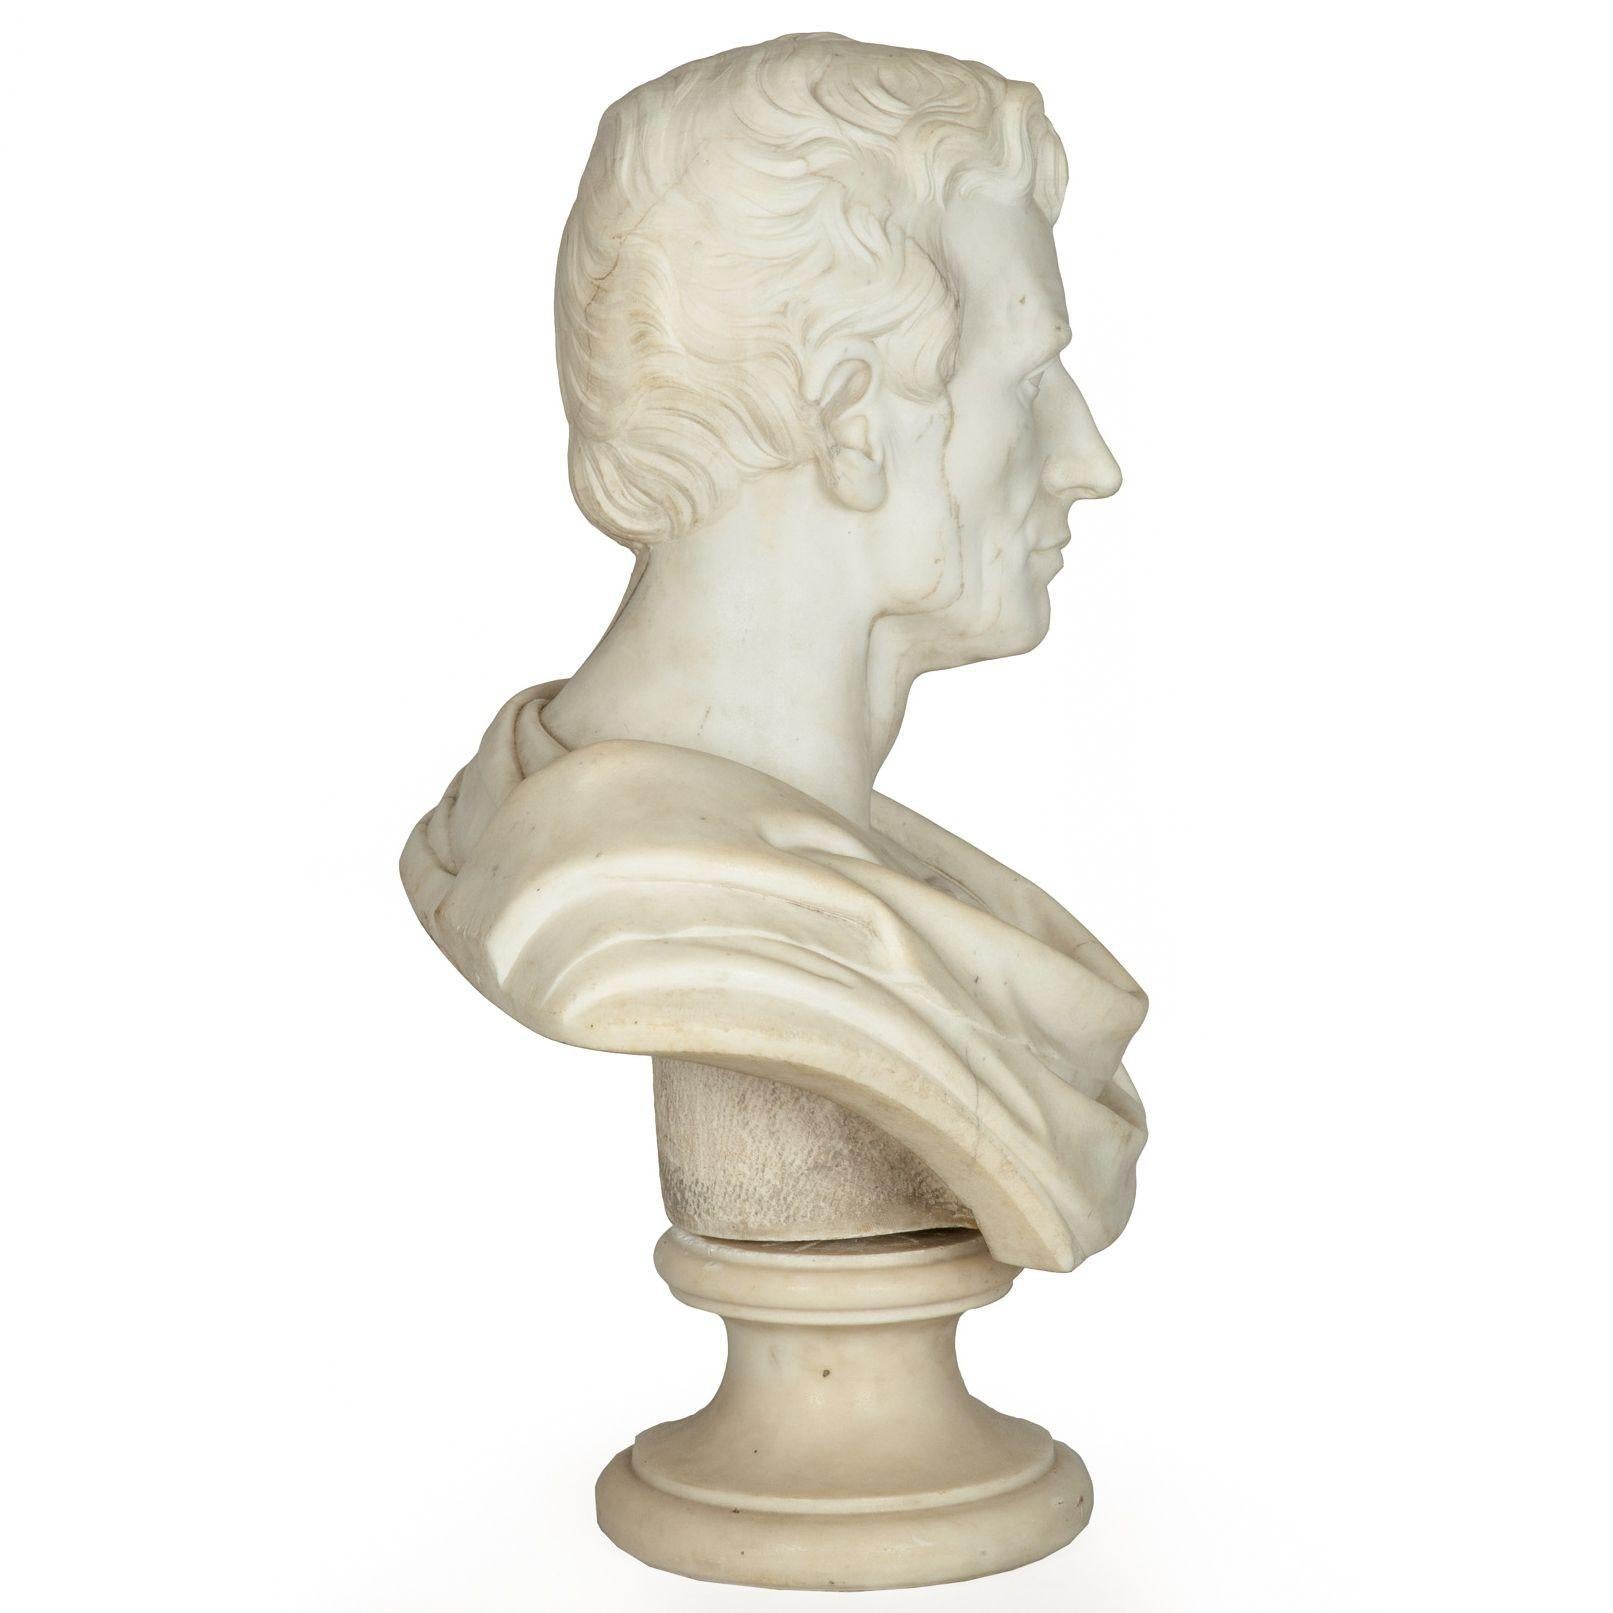 19th Century Carrara Marble Bust Sculpture of Classical Statesman In Good Condition For Sale In Shippensburg, PA